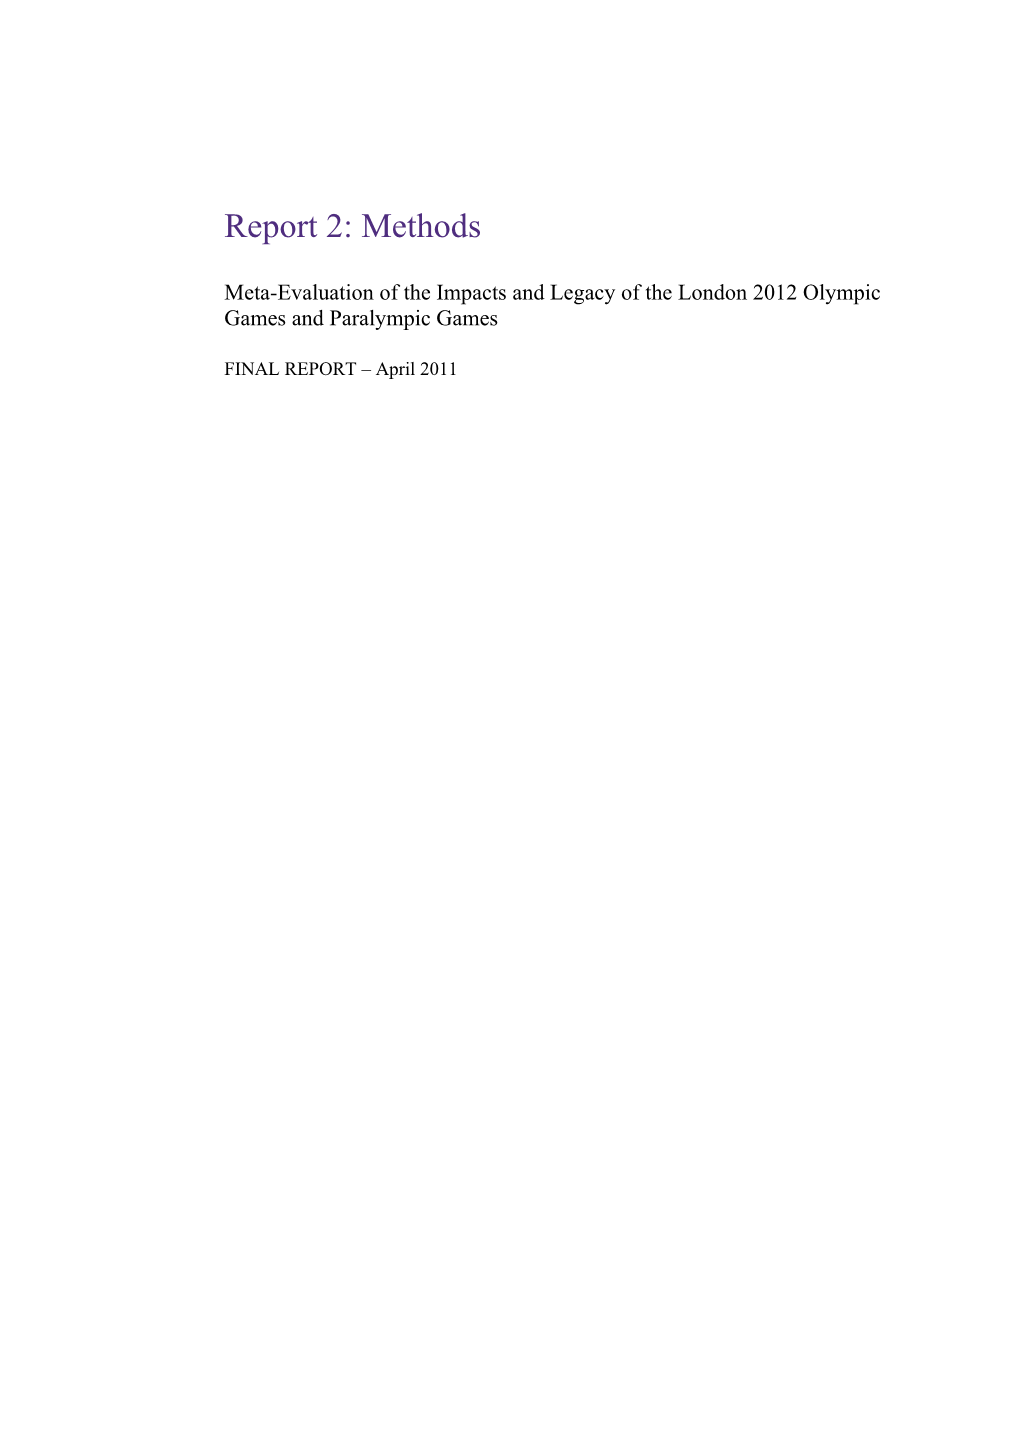 Report 2 Methods: Meta-Evaluation of the Impacts and Legacy of the London 2012 Olympic